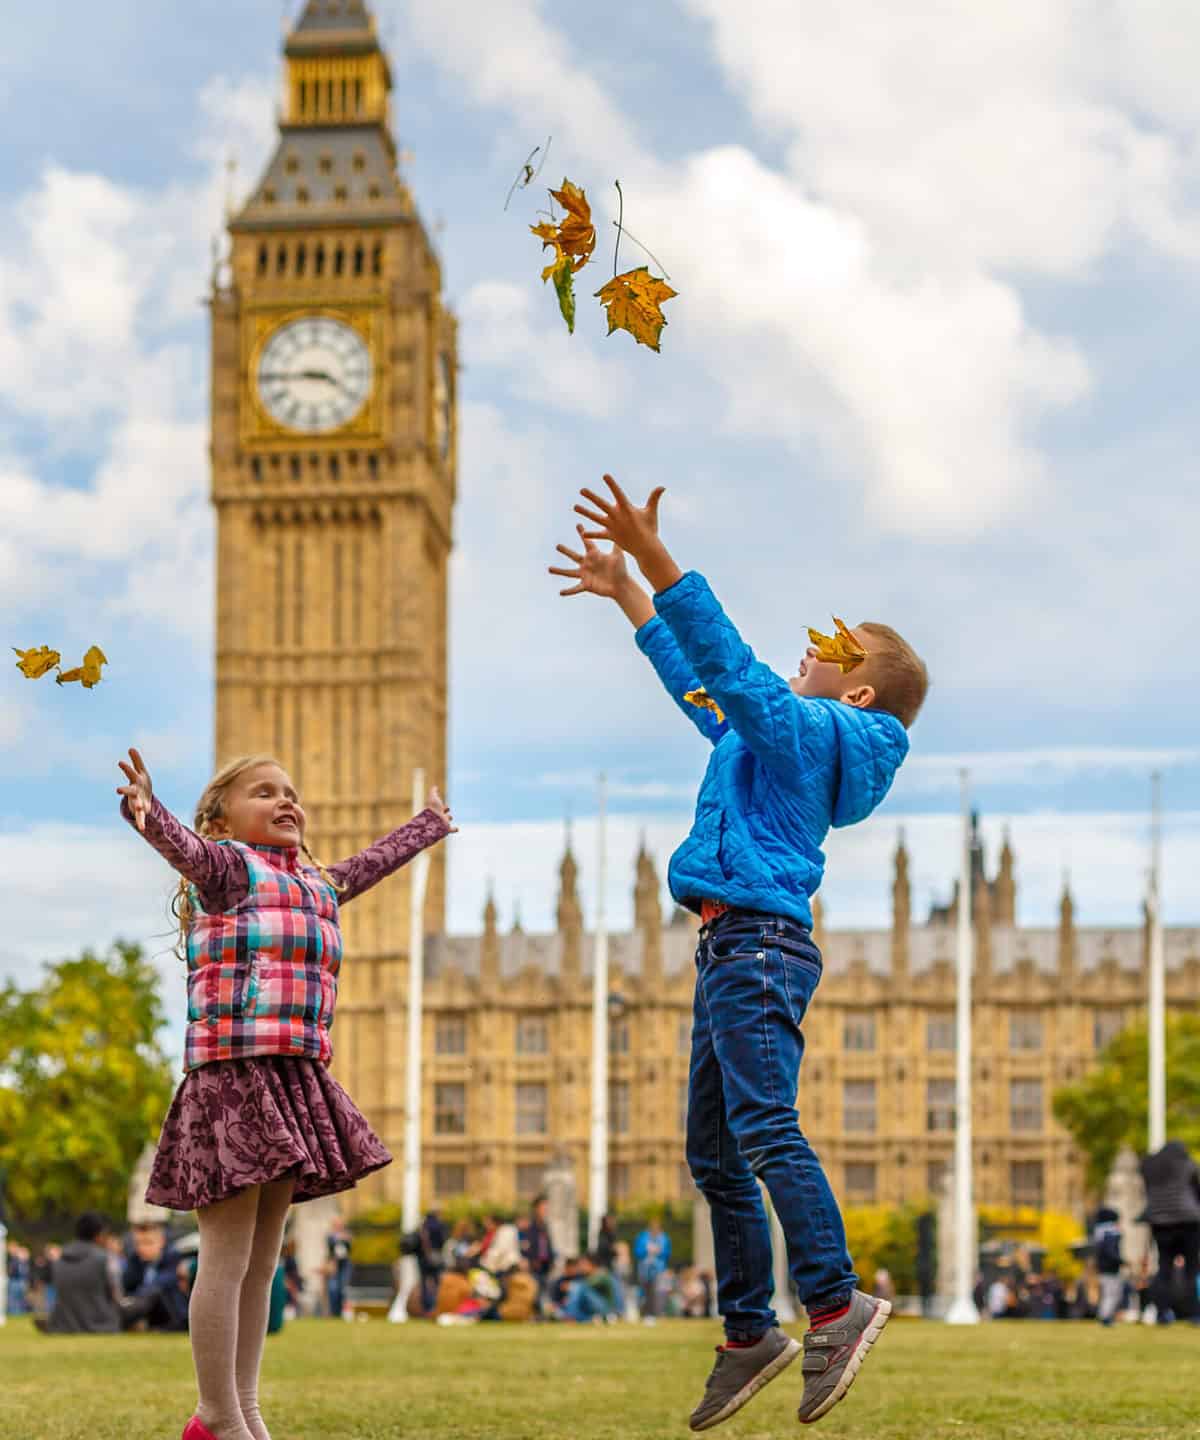 Boy and Girl outside of Big Ben in London 